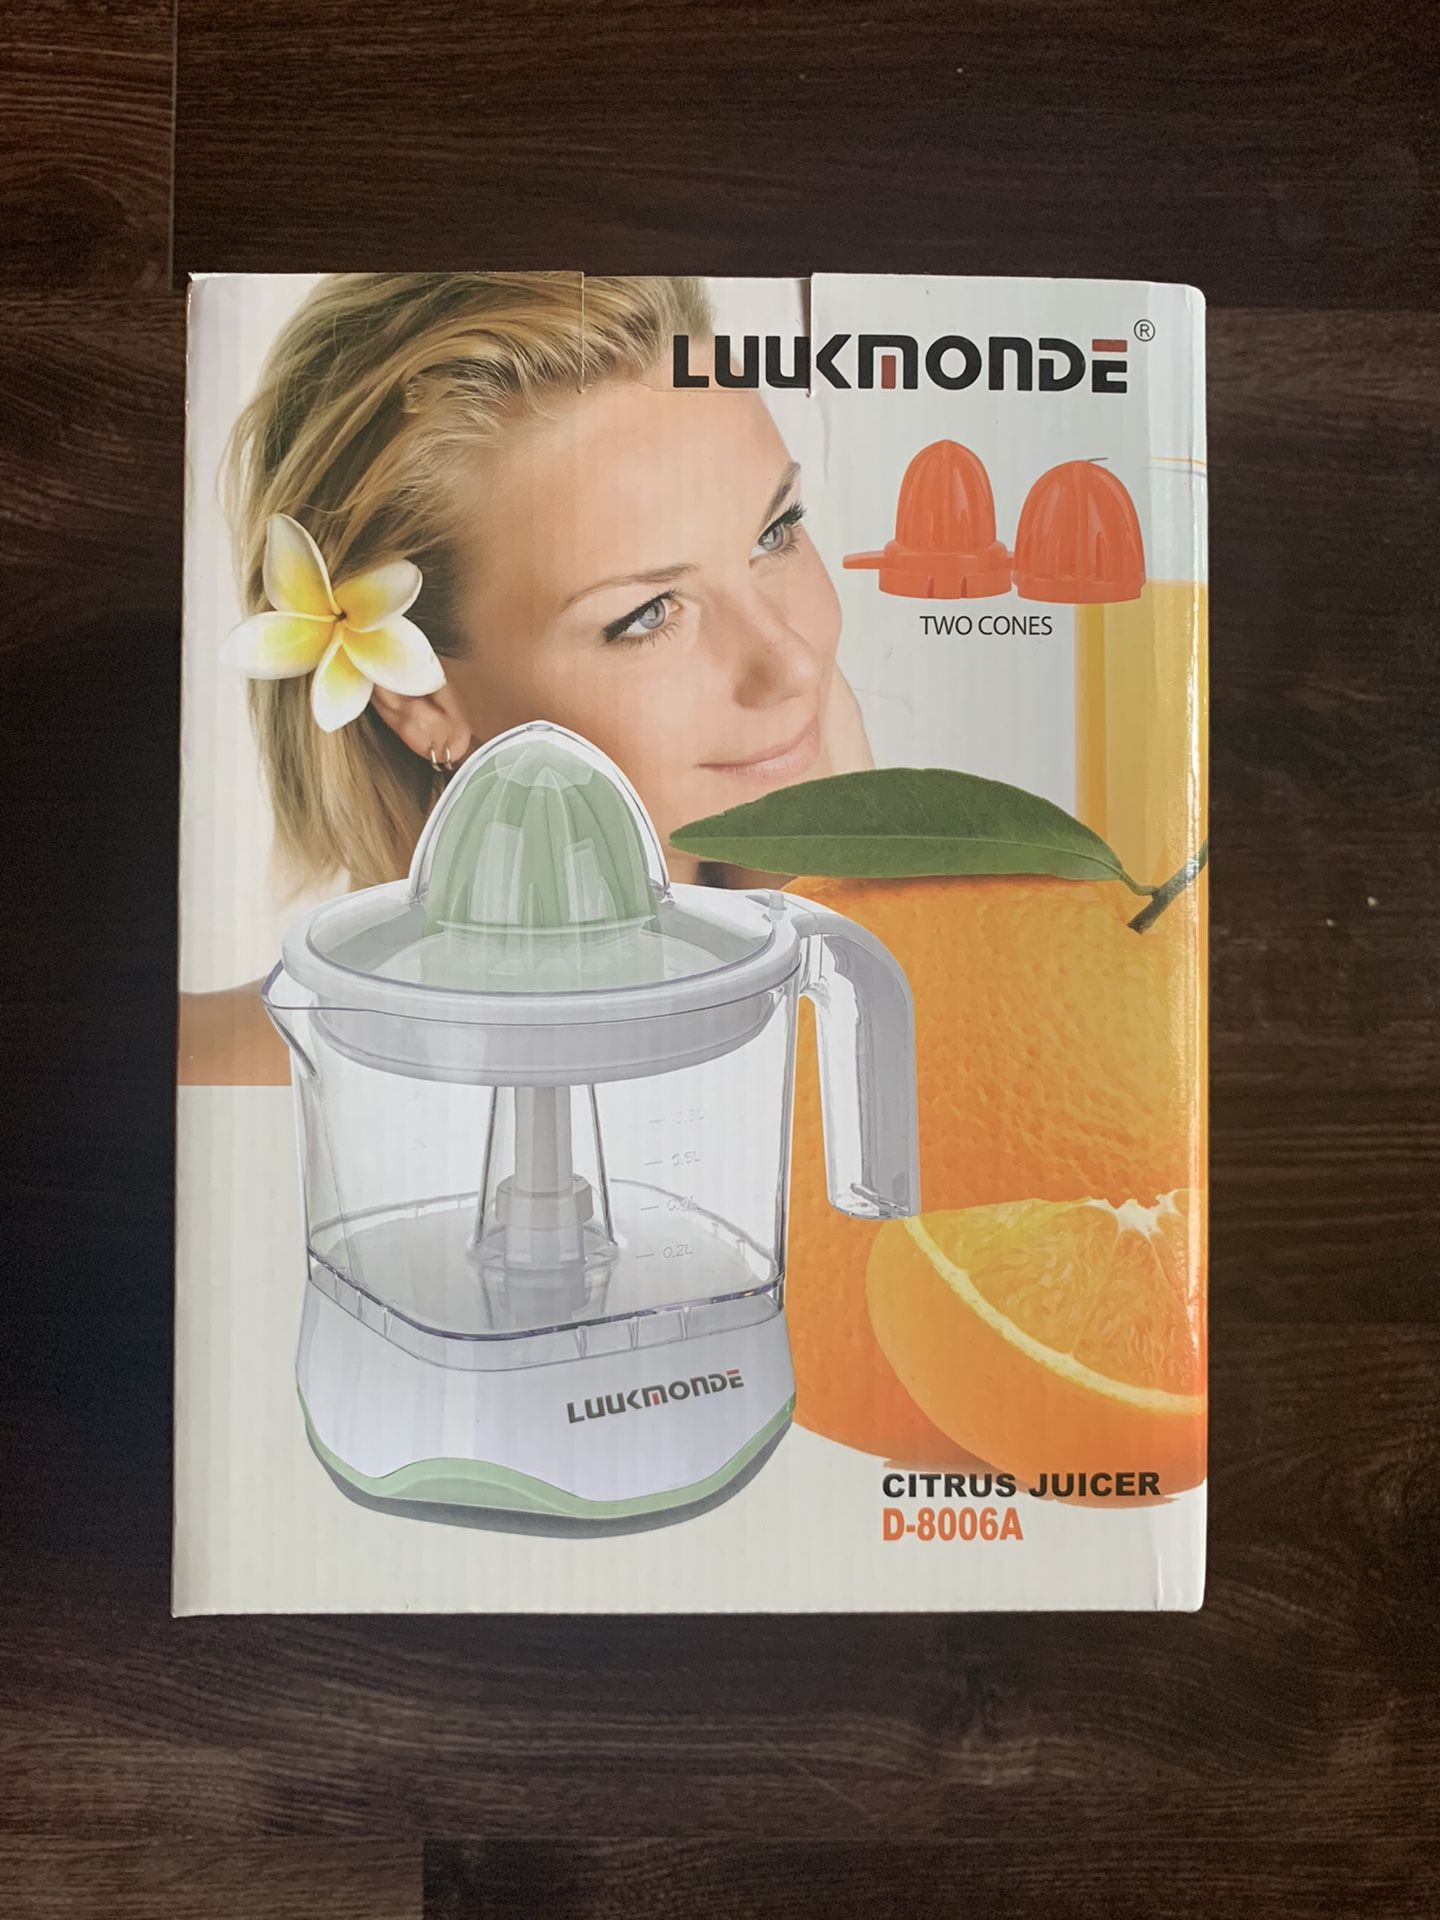 NEW Electric Citrus Juicer with pulp control filter and dust proof cover - Orange Juicer with two size cones and Professional Motor